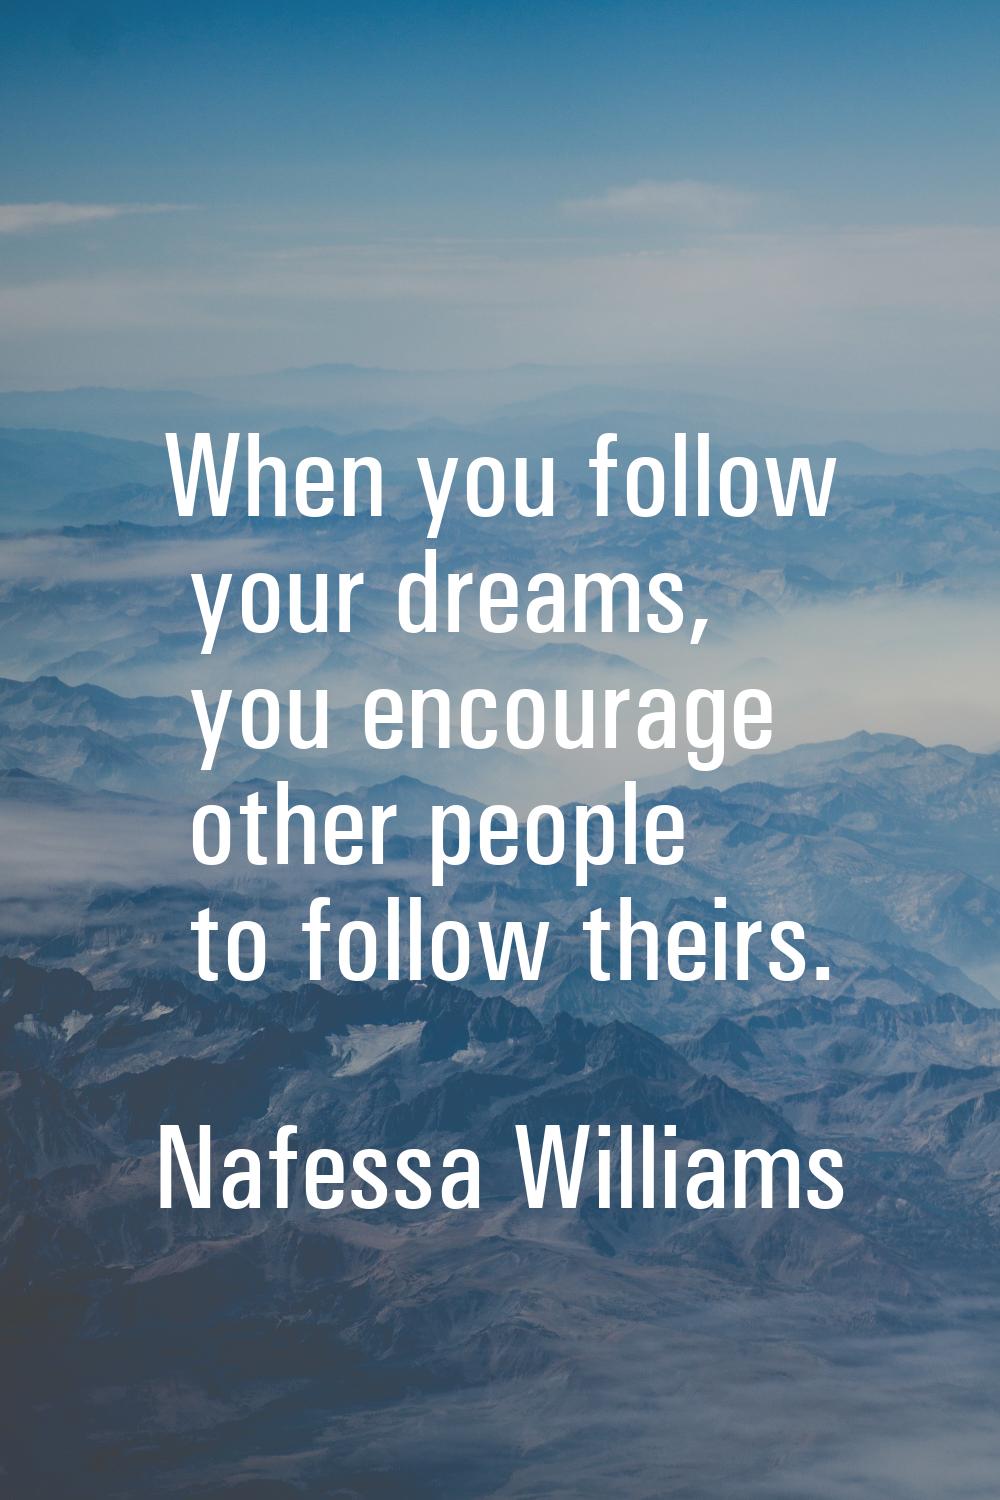 When you follow your dreams, you encourage other people to follow theirs.